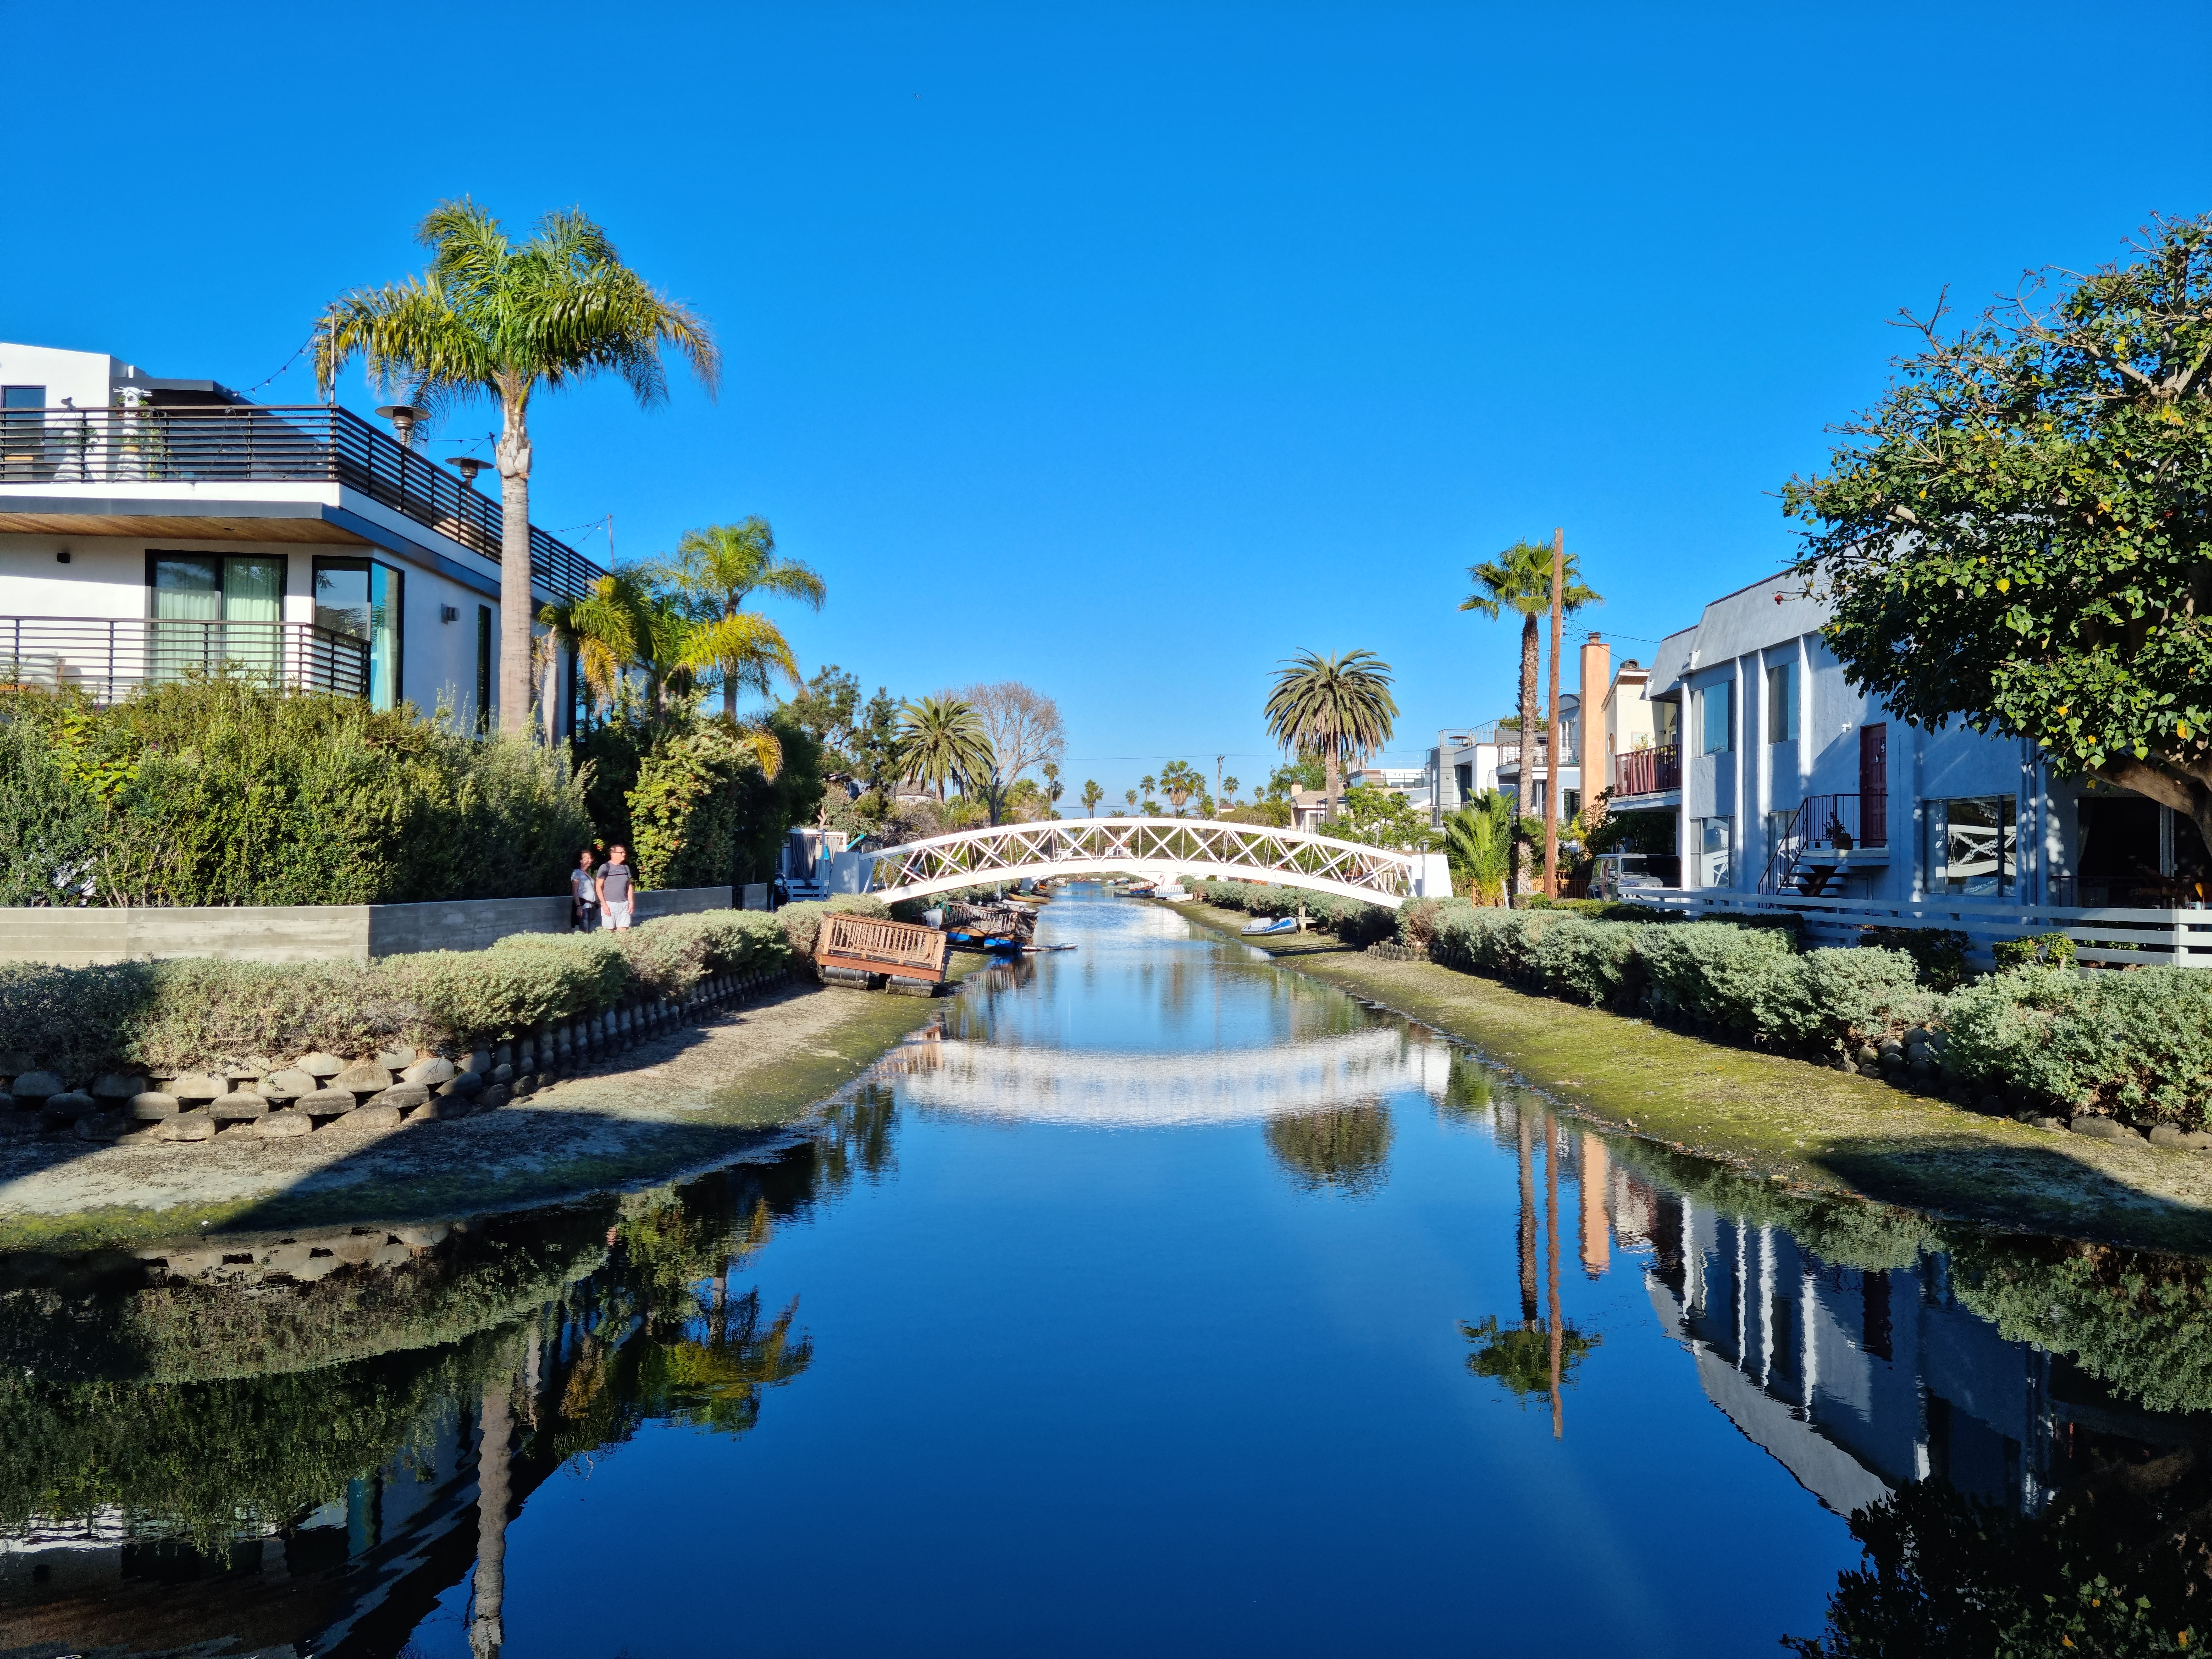 Picture of a place: Venice Canals